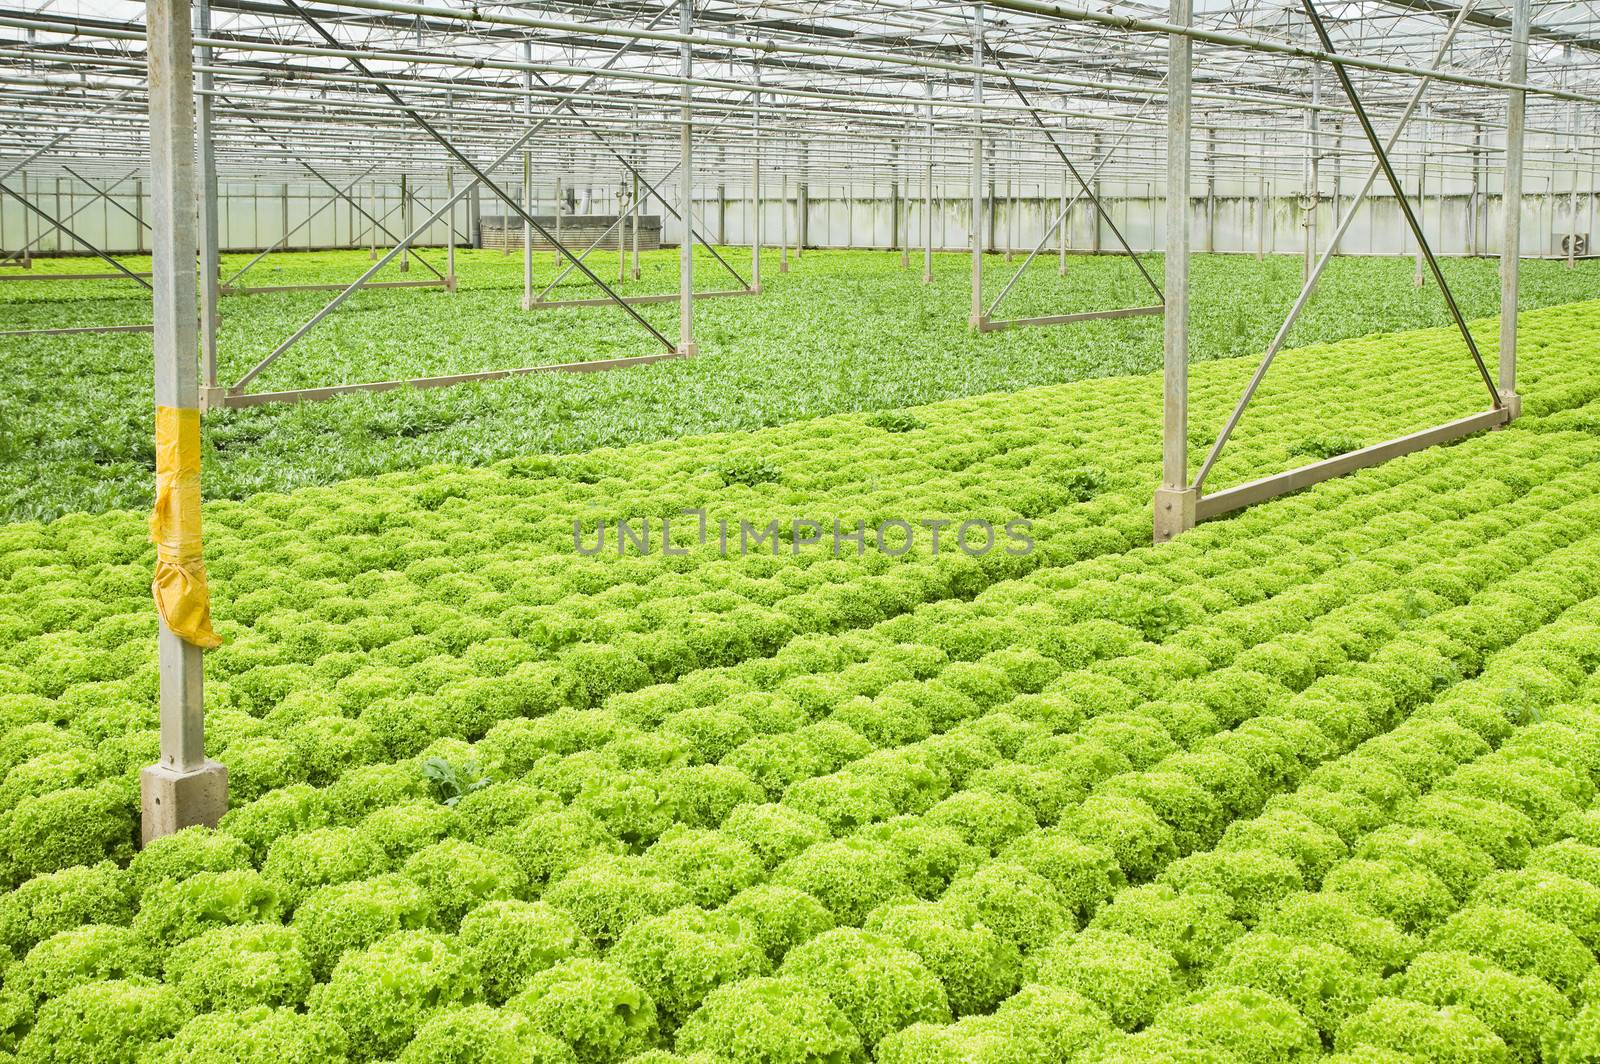 Greenhouse with growing Salad and Andive plants - horizontal